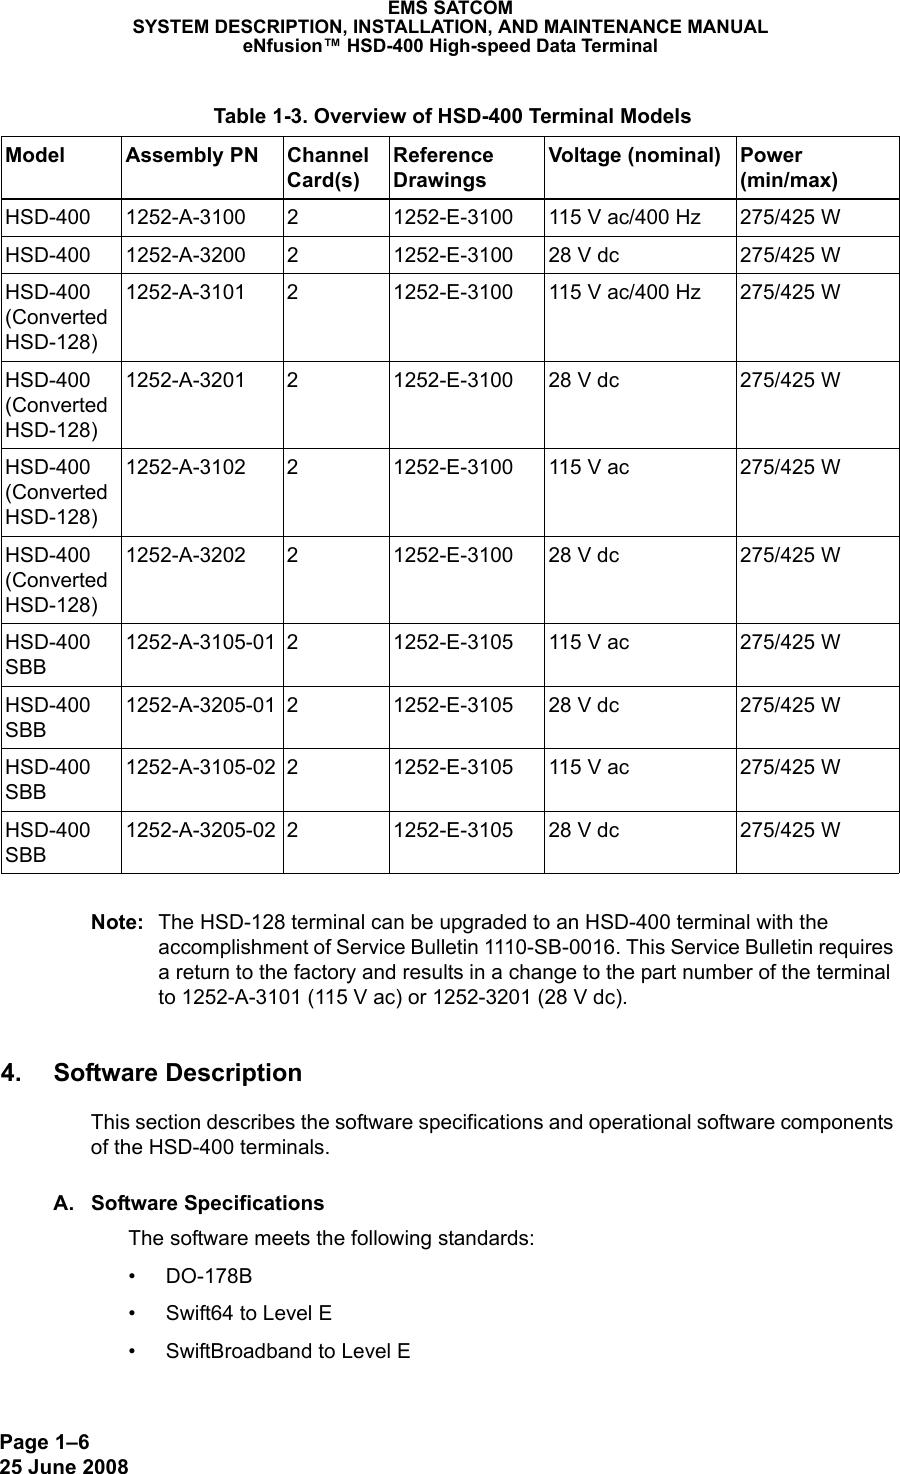 Page 1–625 June 2008 EMS SATCOMSYSTEM DESCRIPTION, INSTALLATION, AND MAINTENANCE MANUALeNfusion™ HSD-400 High-speed Data TerminalNote: The HSD-128 terminal can be upgraded to an HSD-400 terminal with the accomplishment of Service Bulletin 1110-SB-0016. This Service Bulletin requires a return to the factory and results in a change to the part number of the terminal to 1252-A-3101 (115 V ac) or 1252-3201 (28 V dc).4. Software DescriptionThis section describes the software specifications and operational software components of the HSD-400 terminals. A. Software SpecificationsThe software meets the following standards:• DO-178B• Swift64 to Level E• SwiftBroadband to Level E Table 1-3. Overview of HSD-400 Terminal Models Model Assembly PN Channel Card(s)Reference DrawingsVoltage (nominal) Power (min/max)HSD-400 1252-A-3100 2 1252-E-3100 115 V ac/400 Hz 275/425 WHSD-400 1252-A-3200 2 1252-E-3100 28 V dc 275/425 WHSD-400 (Converted HSD-128)1252-A-3101 2 1252-E-3100 115 V ac/400 Hz 275/425 WHSD-400 (Converted HSD-128)1252-A-3201 2 1252-E-3100 28 V dc 275/425 WHSD-400 (Converted HSD-128)1252-A-3102 2 1252-E-3100 115 V ac 275/425 WHSD-400 (Converted HSD-128)1252-A-3202 2 1252-E-3100 28 V dc 275/425 WHSD-400 SBB1252-A-3105-01 2 1252-E-3105 115 V ac 275/425 WHSD-400 SBB1252-A-3205-01 2 1252-E-3105 28 V dc 275/425 WHSD-400 SBB1252-A-3105-02 2 1252-E-3105 115 V ac 275/425 WHSD-400 SBB1252-A-3205-02 2 1252-E-3105 28 V dc 275/425 W